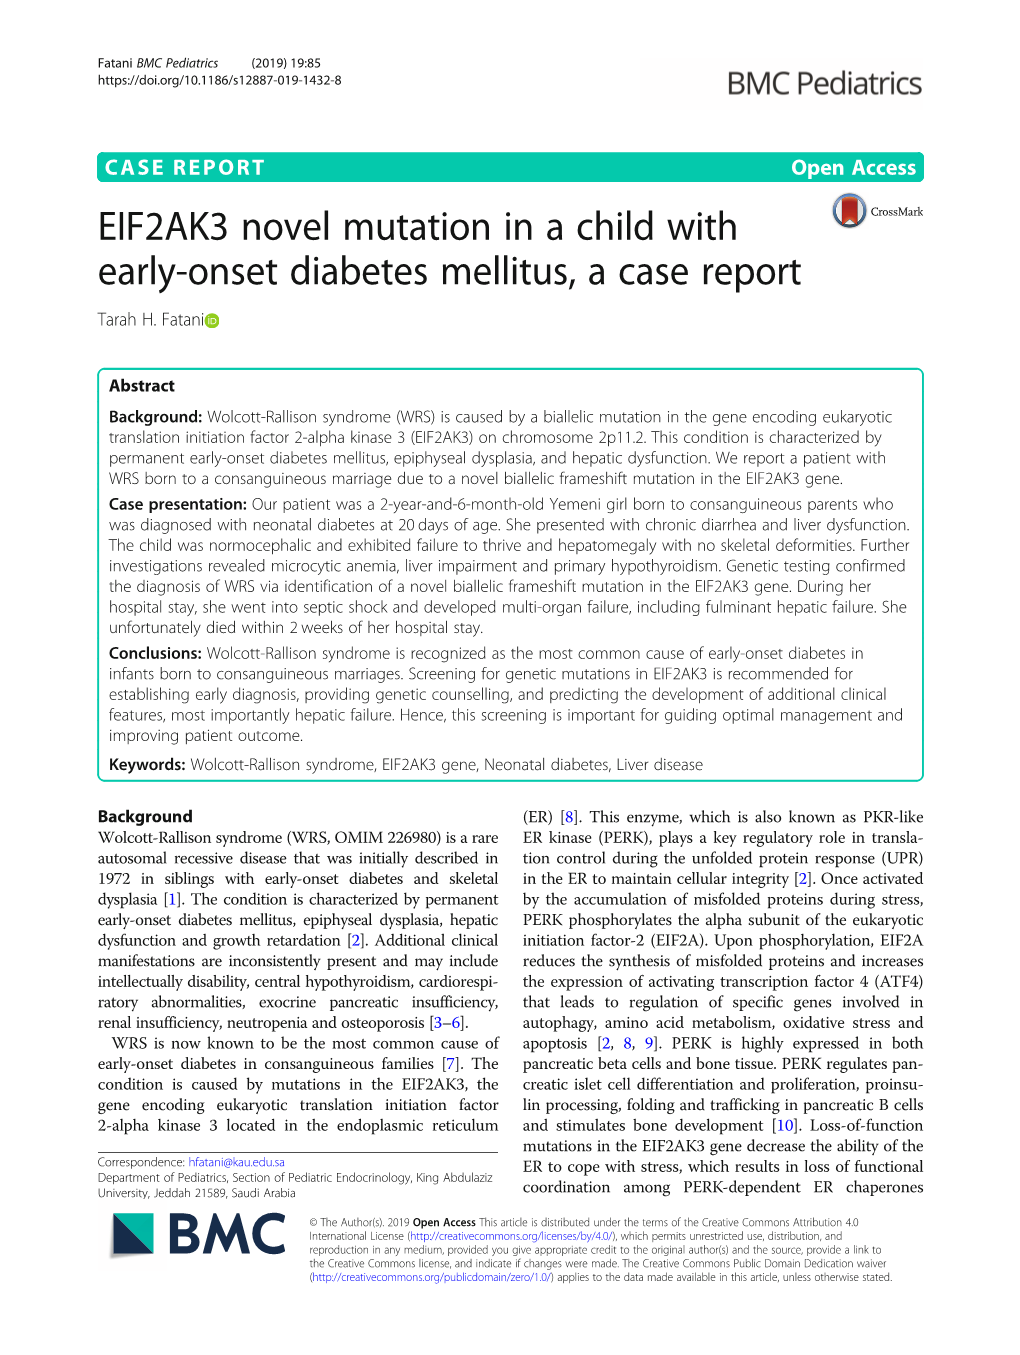 EIF2AK3 Novel Mutation in a Child with Early-Onset Diabetes Mellitus, a Case Report Tarah H